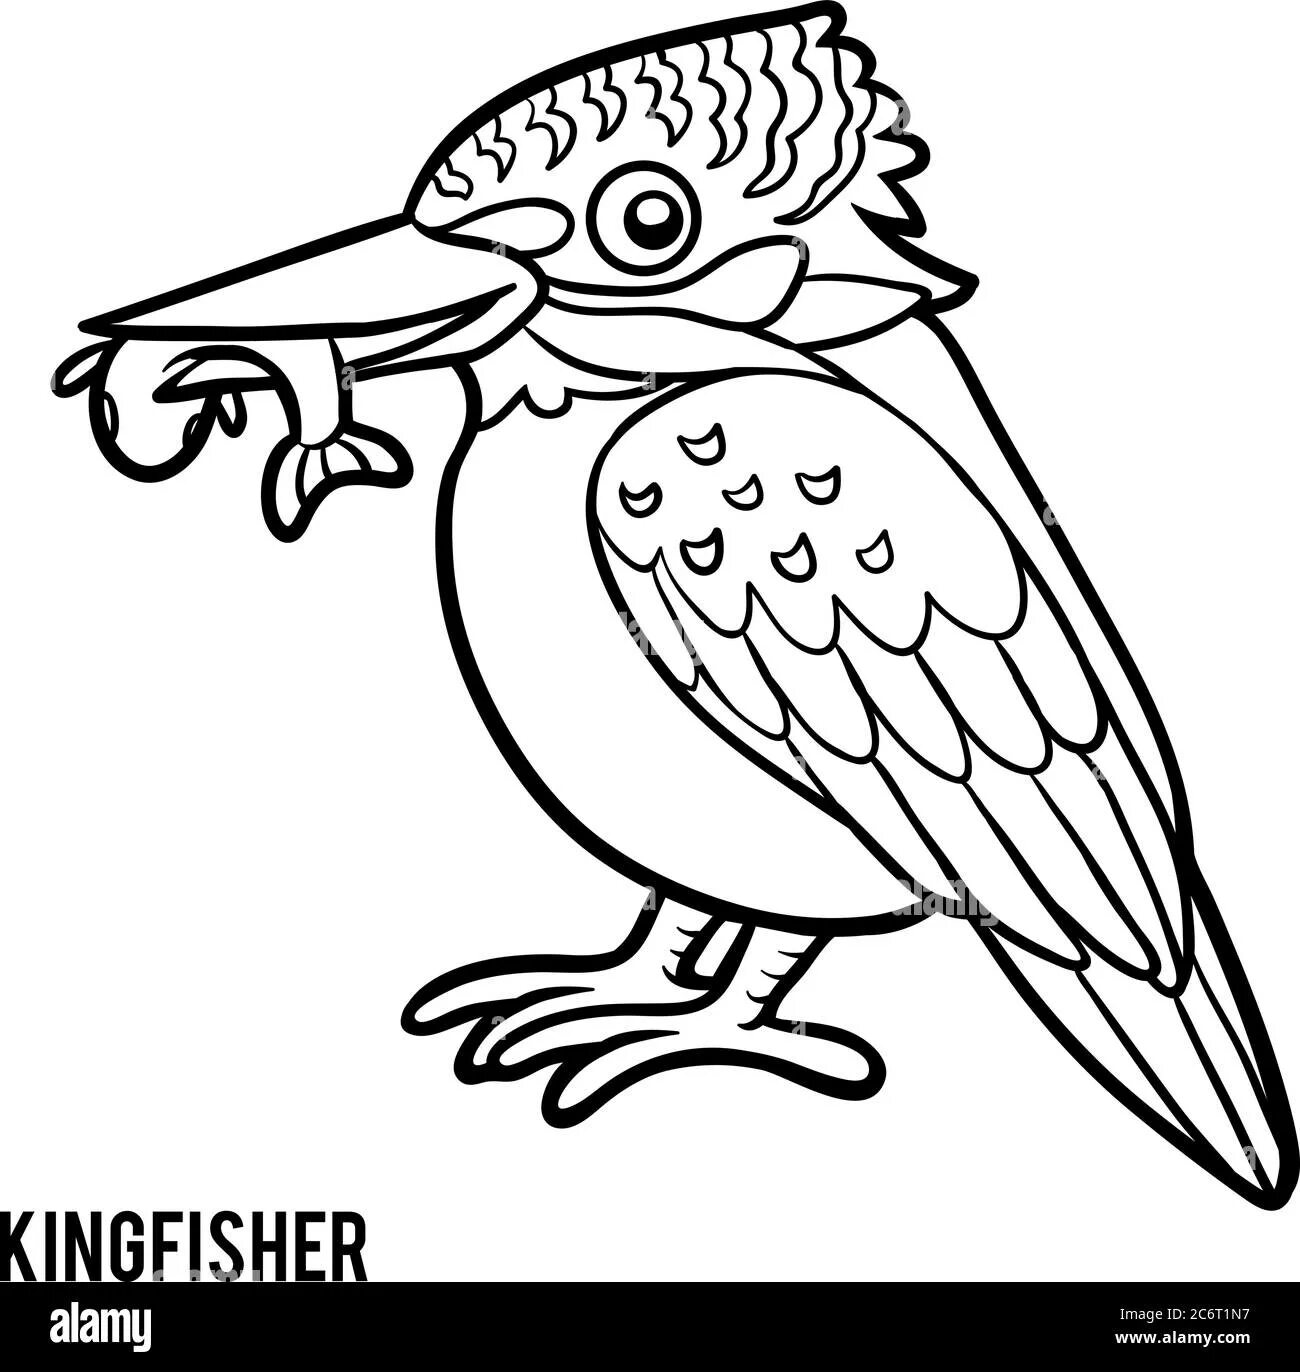 Coloring book hypnotic kingfisher